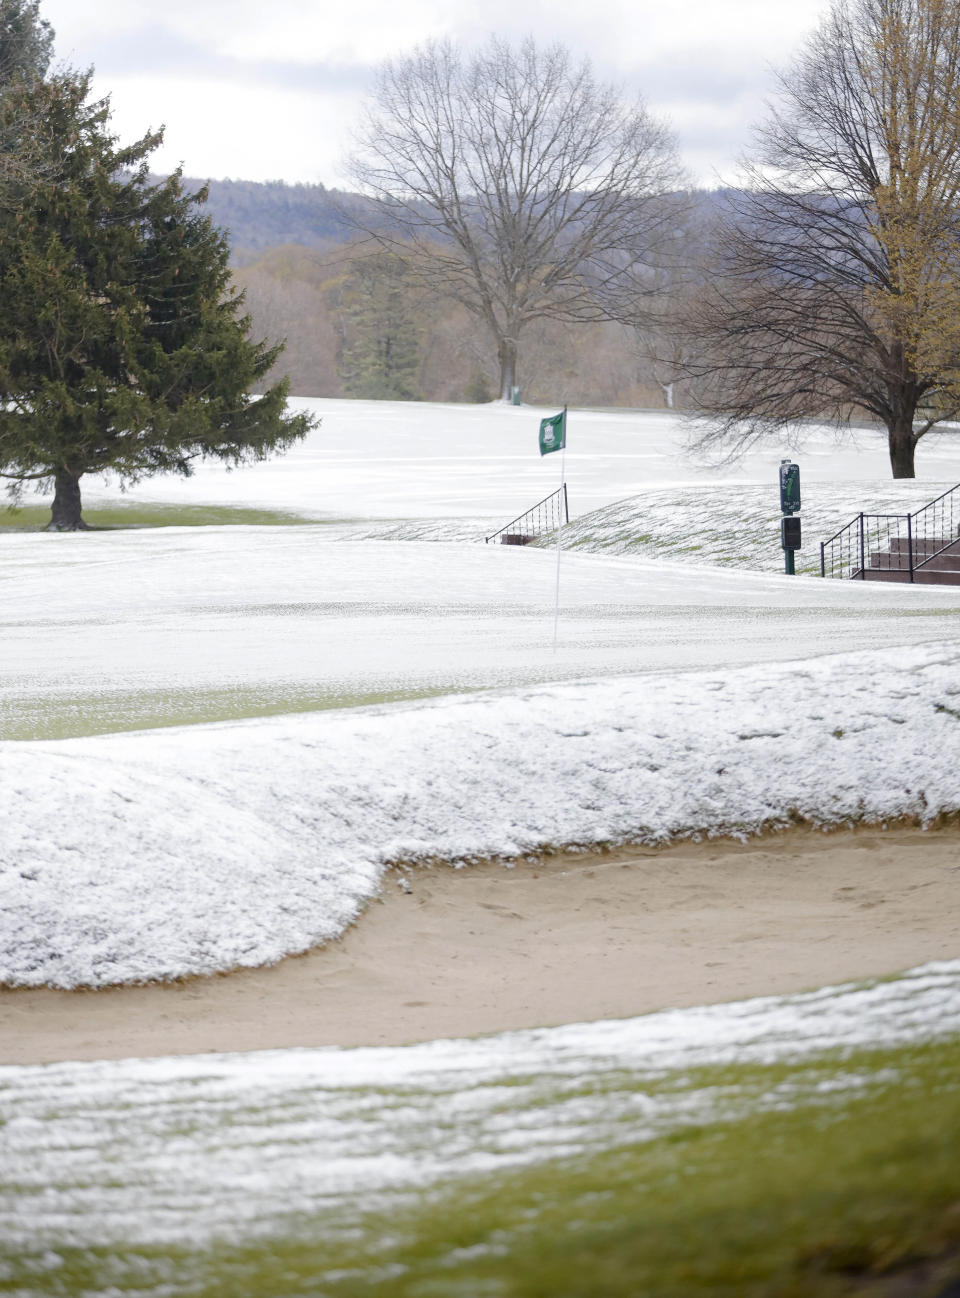 The greens and fairways are covered in snow, just as golf courses were starting to open for the season at Country Club of Pittsfield, Mass., on Saturday, May 9, 2020. Mother’s Day weekend got off to an unseasonably snowy start in areas of the Northeast thanks to the polar vortex. While Manhattan, Boston and many other coastal areas received only a few flakes, some higher elevation areas in northern New York and New England reported 9 inches or more. (Stephanie Zollshan/The Berkshire Eagle via AP)